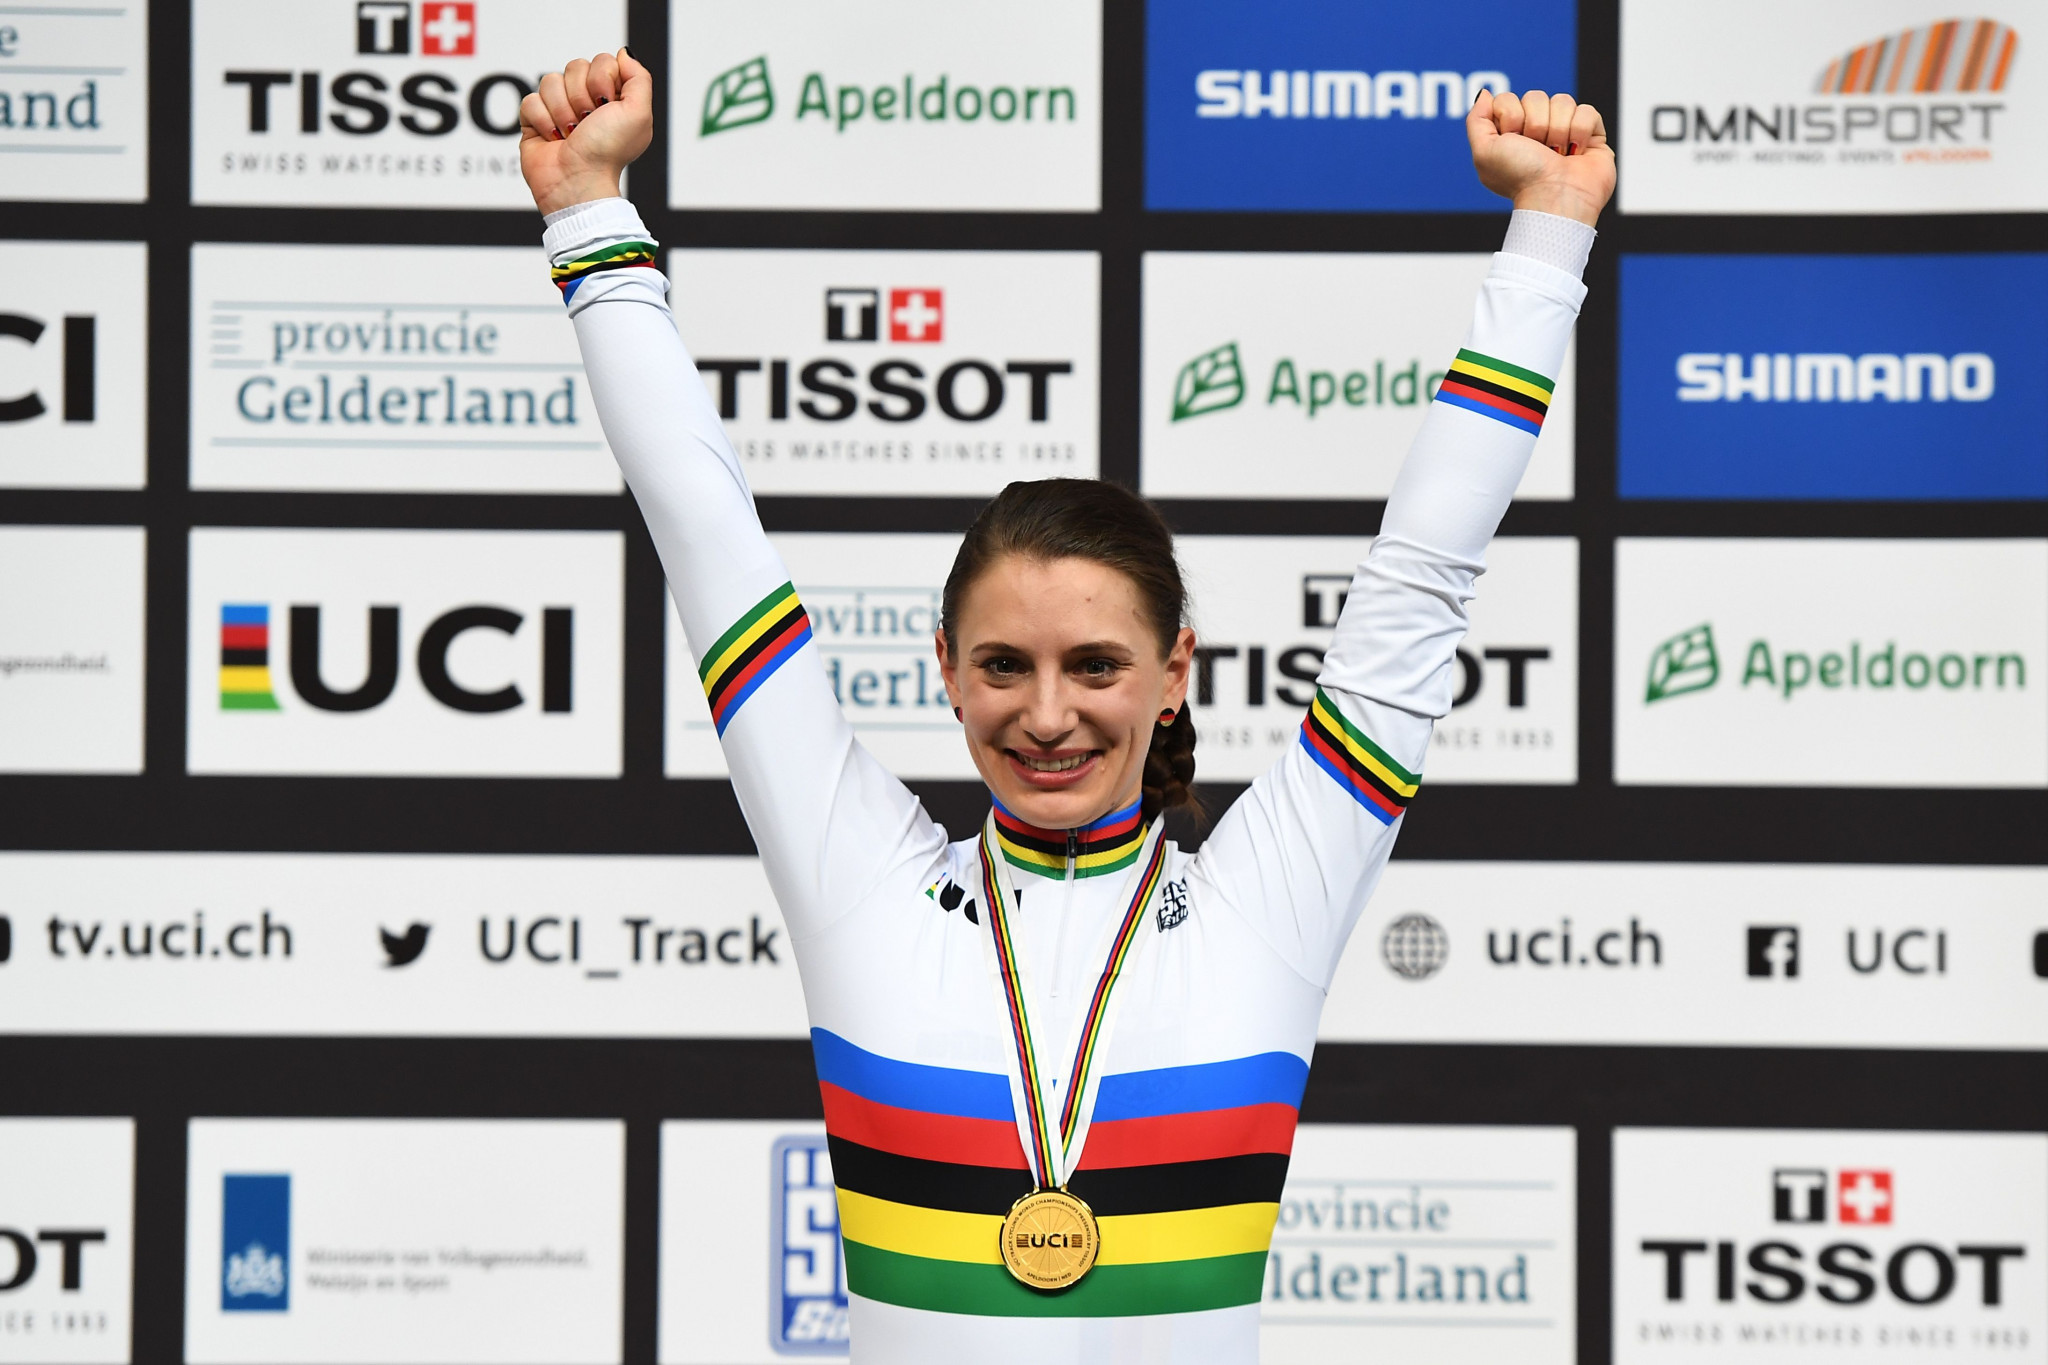 Detlef Uibel coached Miriam Welte to a gold medal in the women's 500m time trial at this year's UCI Track Cycling World Championships in Apeldoorn - one of three victories for Germany at the event ©Getty Images